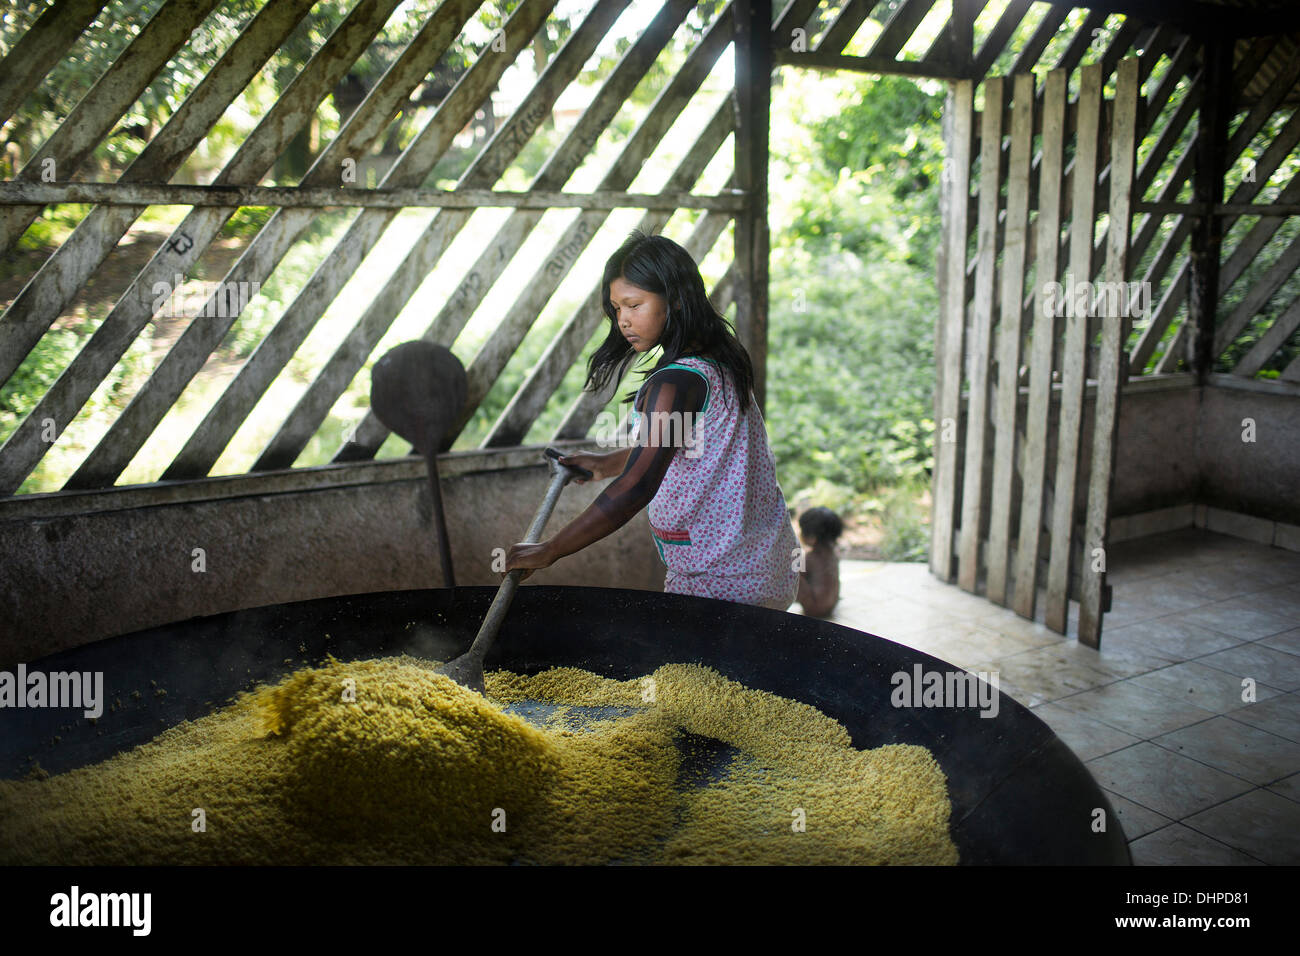 May 6, 2013 - Poti-Kro, Para, Brazil - Yucca is a staple food for the Xikrin. Here, grated yucca is roasted to make farinha, which accompanies almost every meal. The indigenous Xikrin people live on the Bacaja, a tributary of the Xingu River, where construction of the Belo Monte Dam is reaching peak construction. Some scientists warn that the water level of the Bacaja will decrease precipitously due to the dam. (Credit Image: © Taylor Weidman/ZUMA Wire/ZUMAPRESS.com) Stock Photo